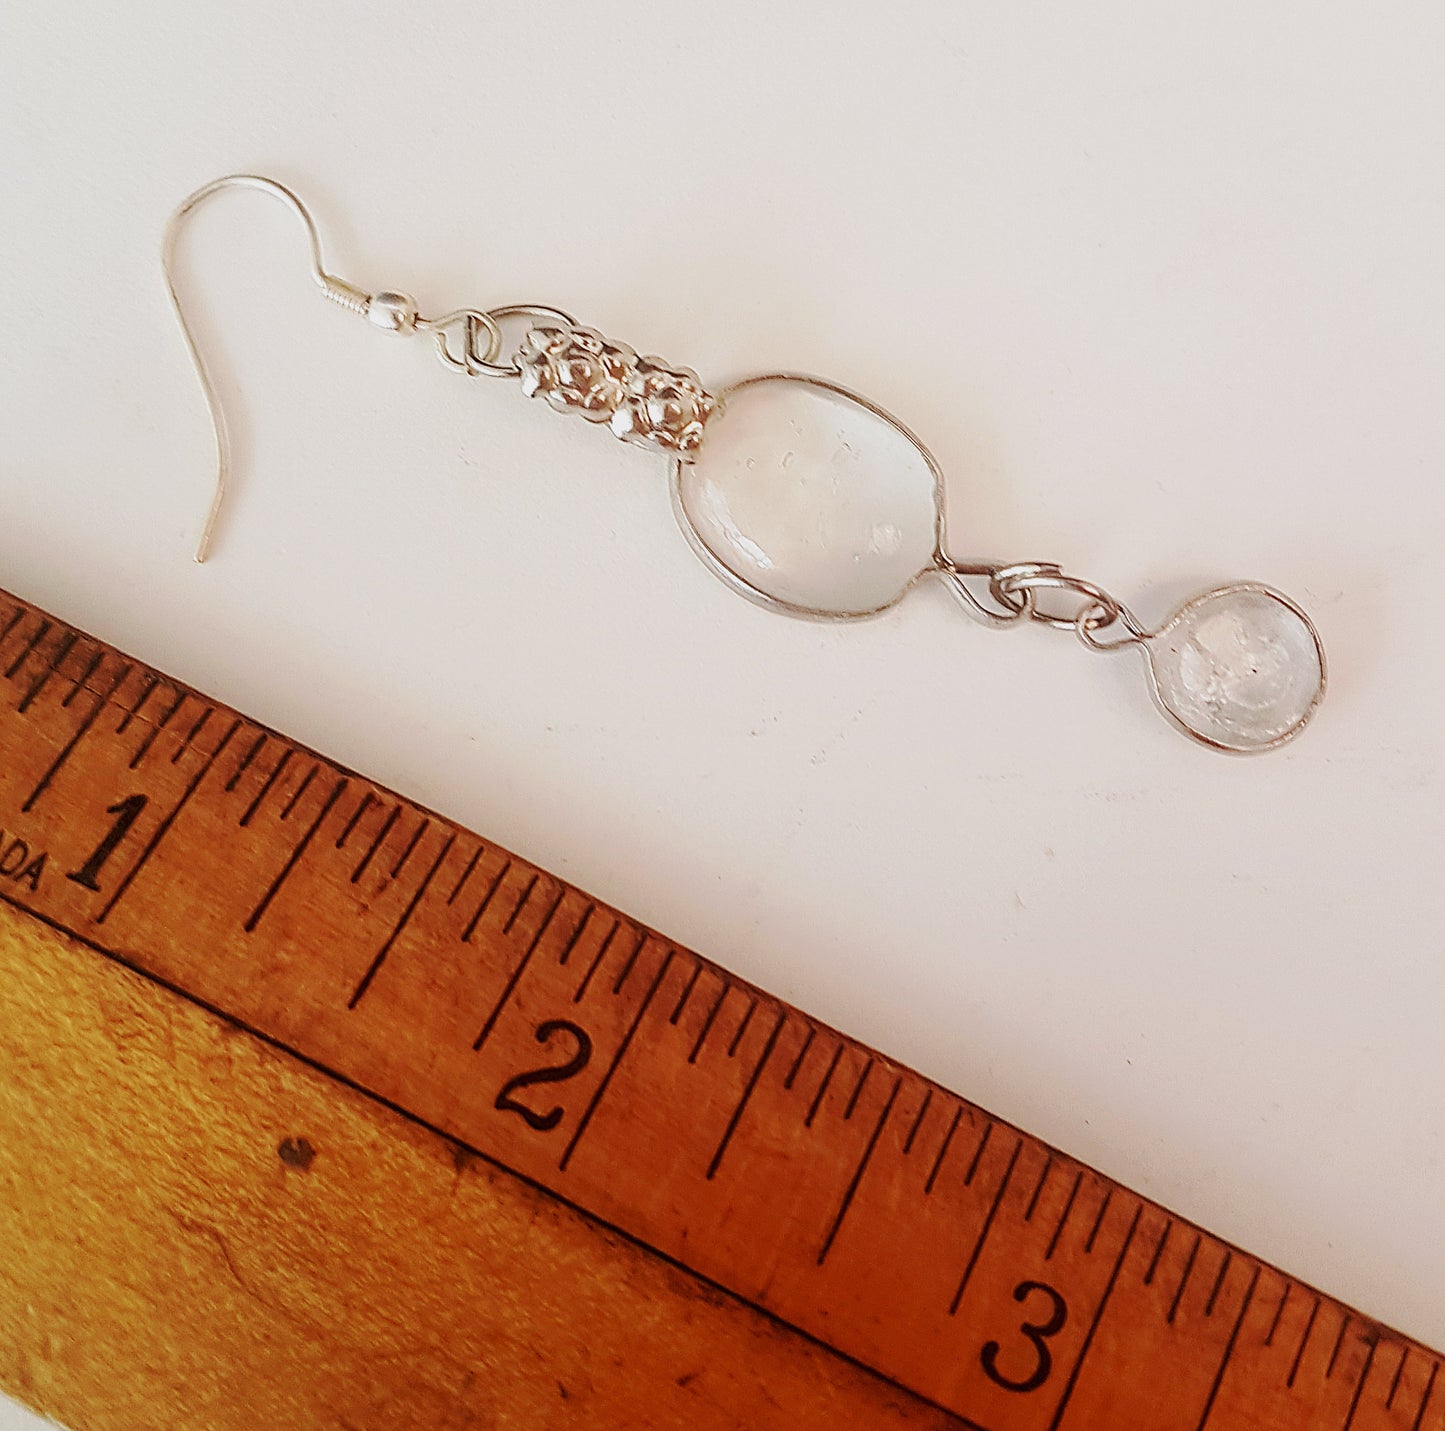 Vintage clear cristal dangle earrings. Antique aesthetic. Delicate and lightweight.